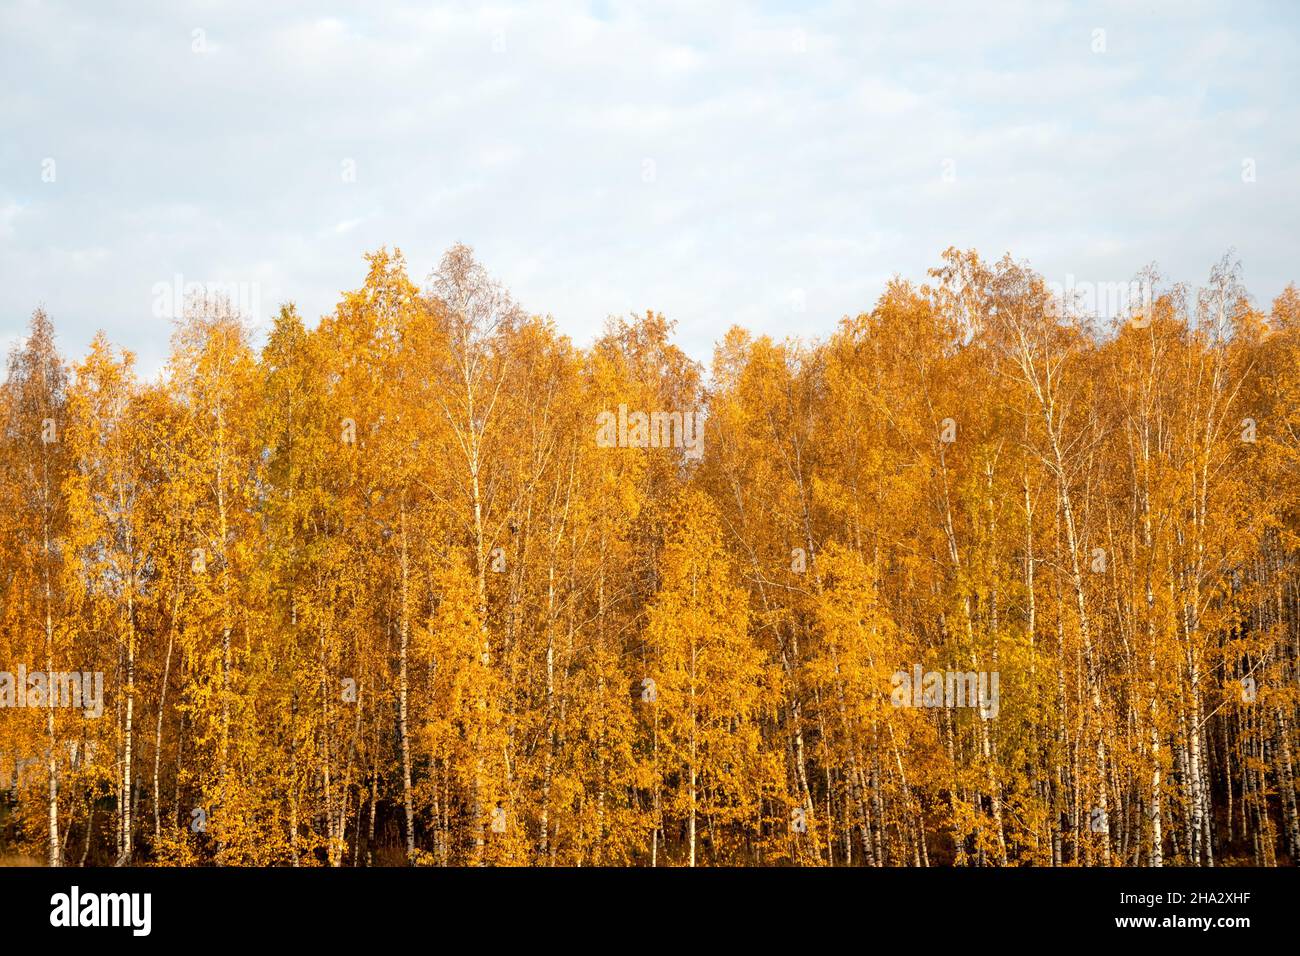 Russian white birches with yellow foliage in late autumn. Stock Photo